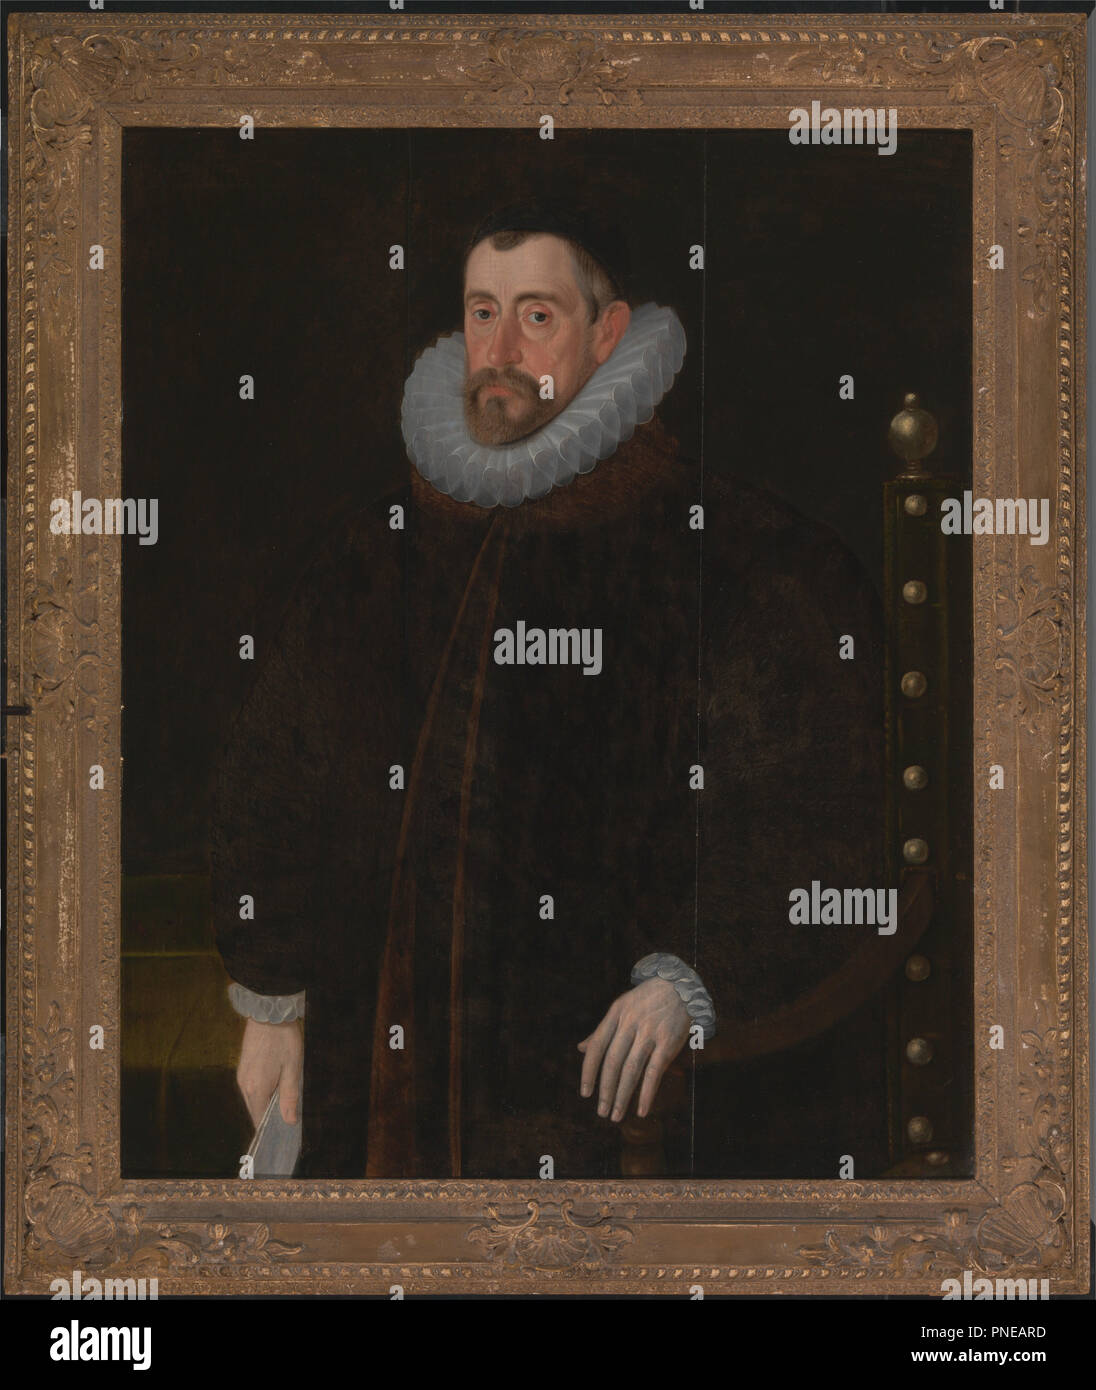 Sir Francis Walsingham. Date/Period: Ca. 1585. Painting. Oil on panel. Height: 914 mm (35.98 in); Width: 737 mm (29.01 in). Author: John de Critz. Stock Photo